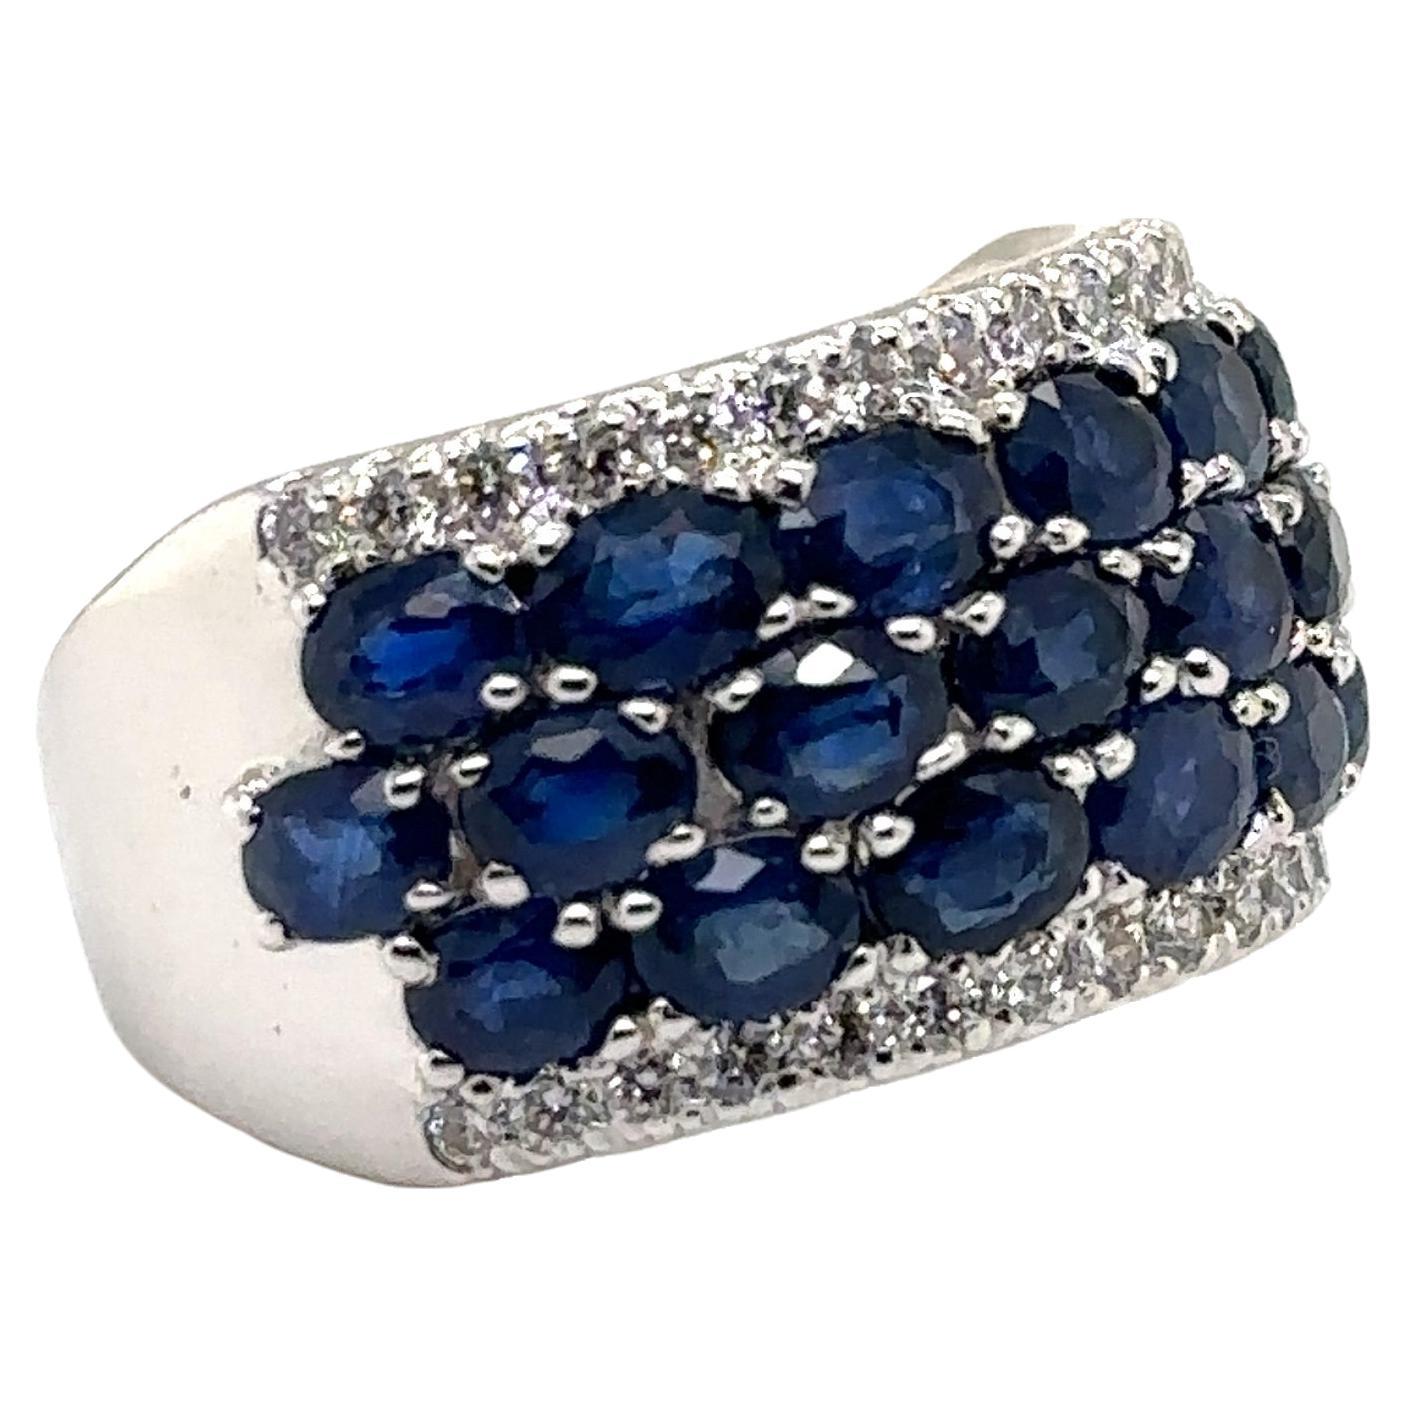 JAS-21-2246 - 14K WHITE GOLD 0.50Ct GH-SI1 DIAMONDS & 4X3 5.50Ct OVAL SAPPHIRES  For Sale